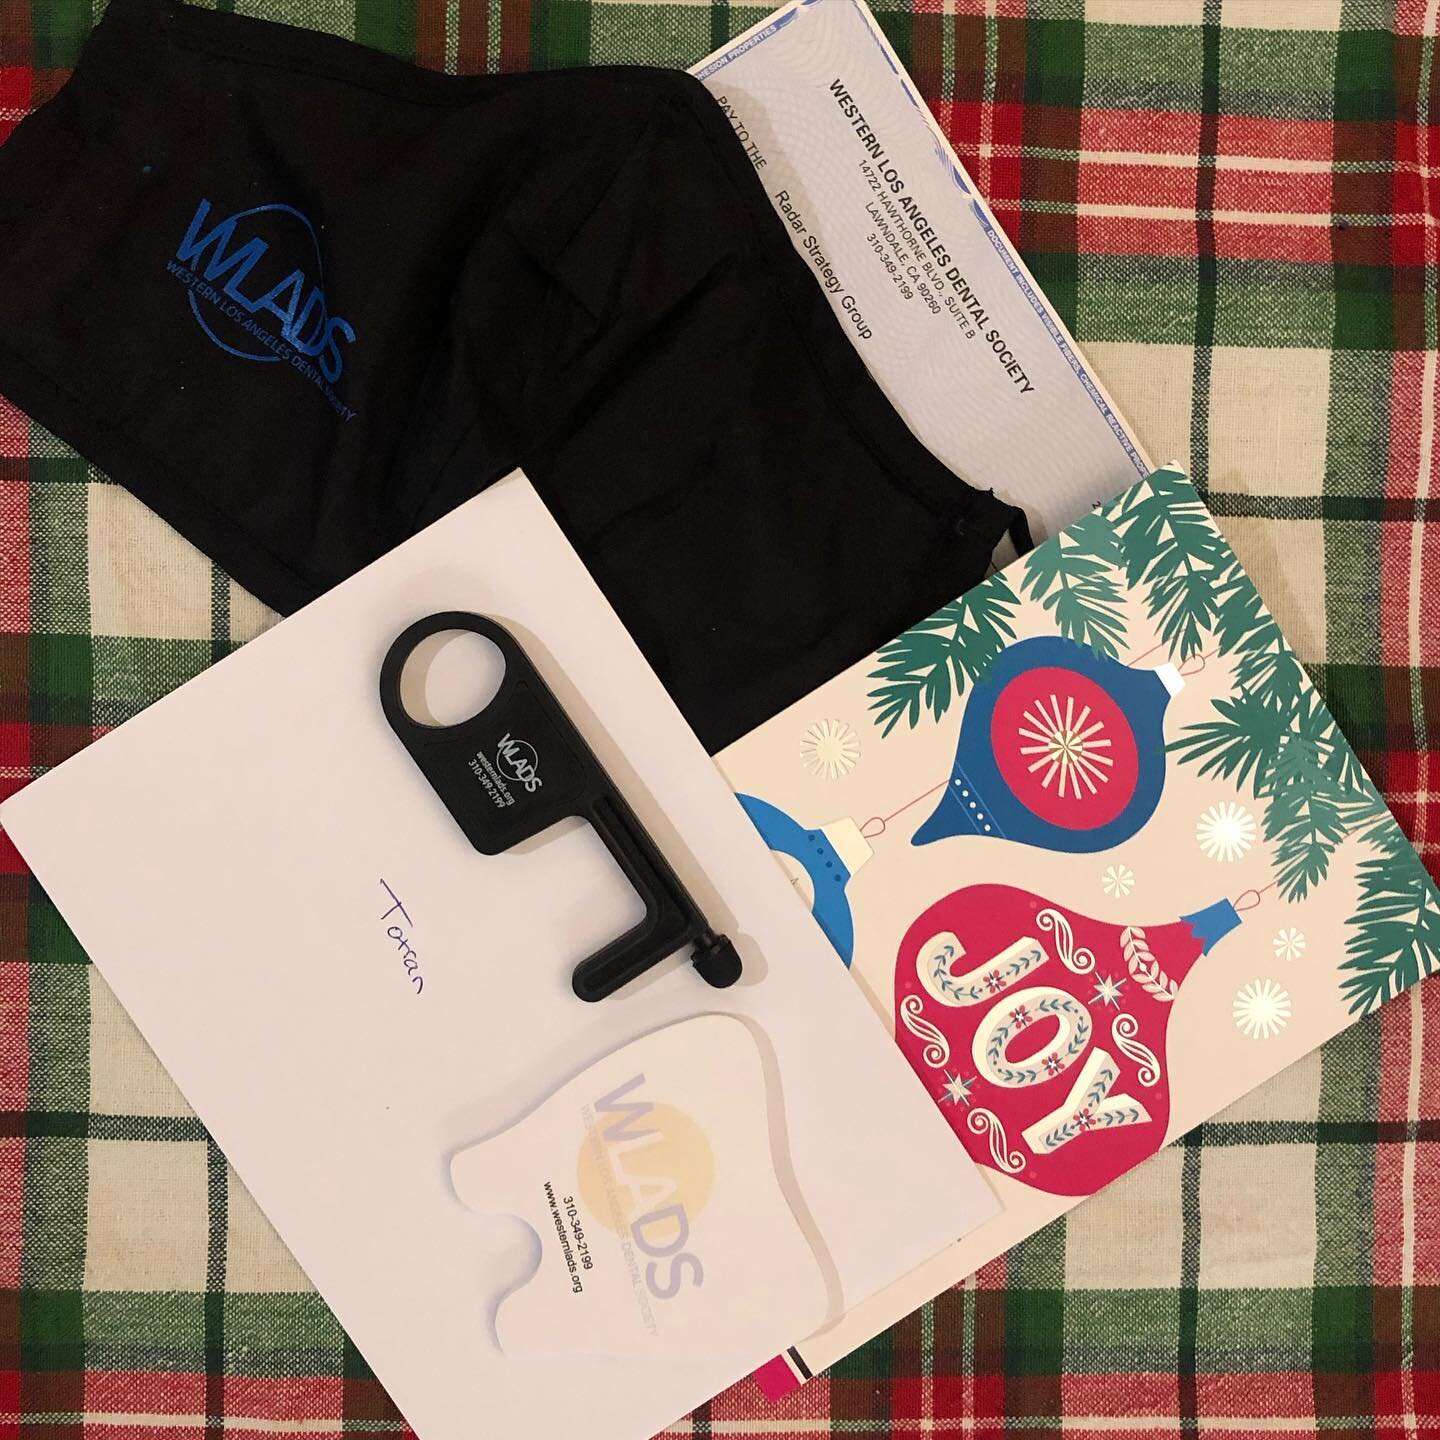 ☃️It looks like we&rsquo;ve been good this year! What a pleasant surprise to receive an honorarium for our presentation to dental students and professionals back in November, plus some fun @westernladentalsoc swag! So excited to test out that no-touc